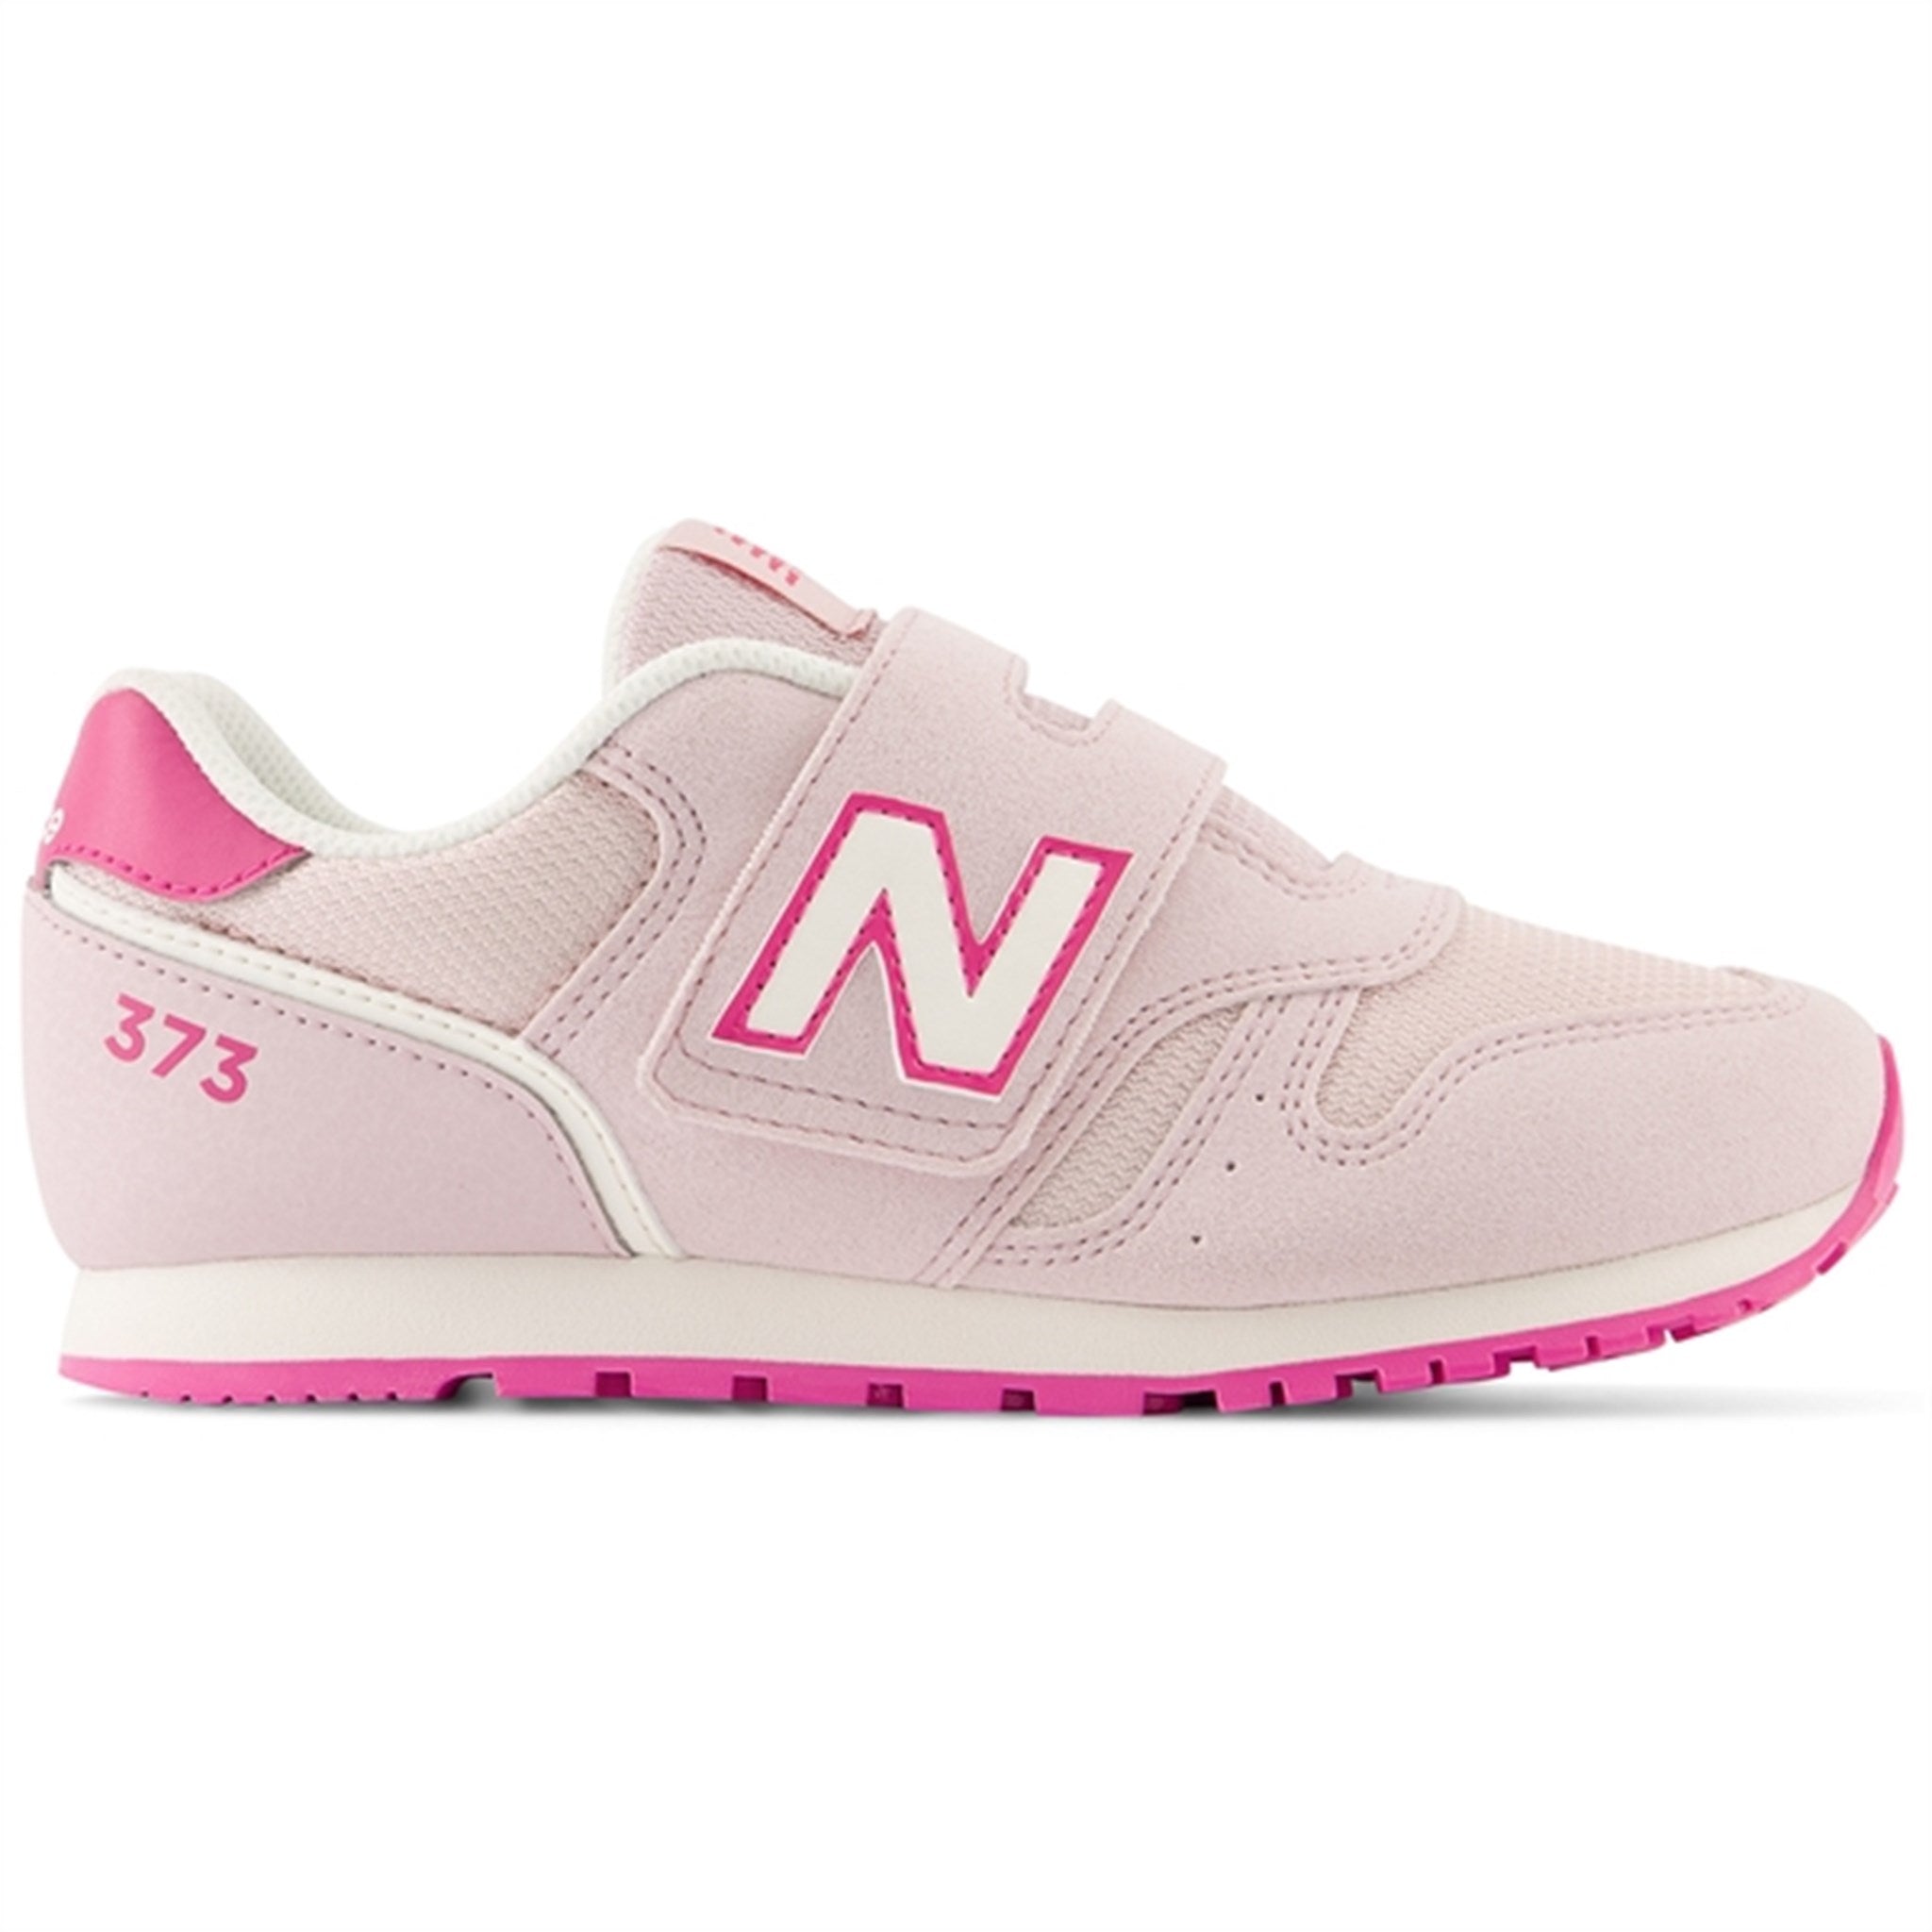 New Balance 373 Stone Pink Sneakers